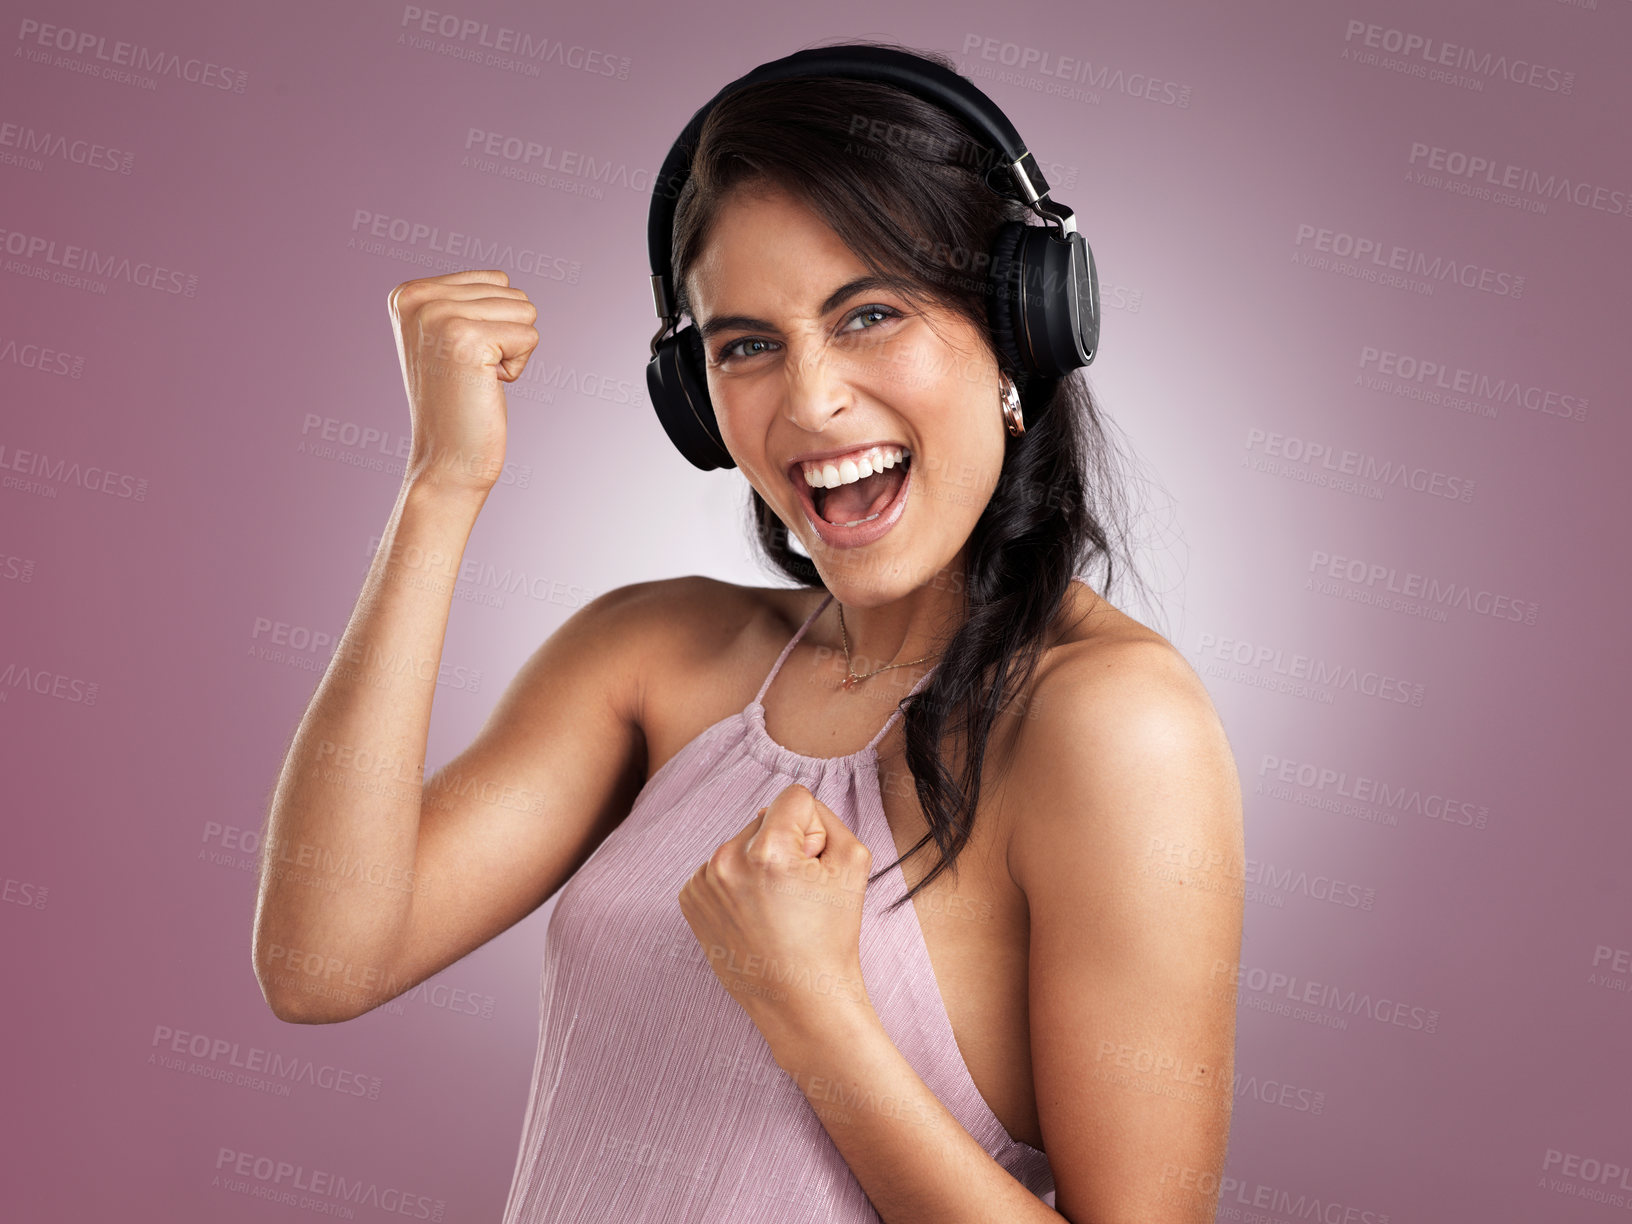 Buy stock photo Shot of a beautiful young cheerful woman celebrating while wearing headphones against a pink background